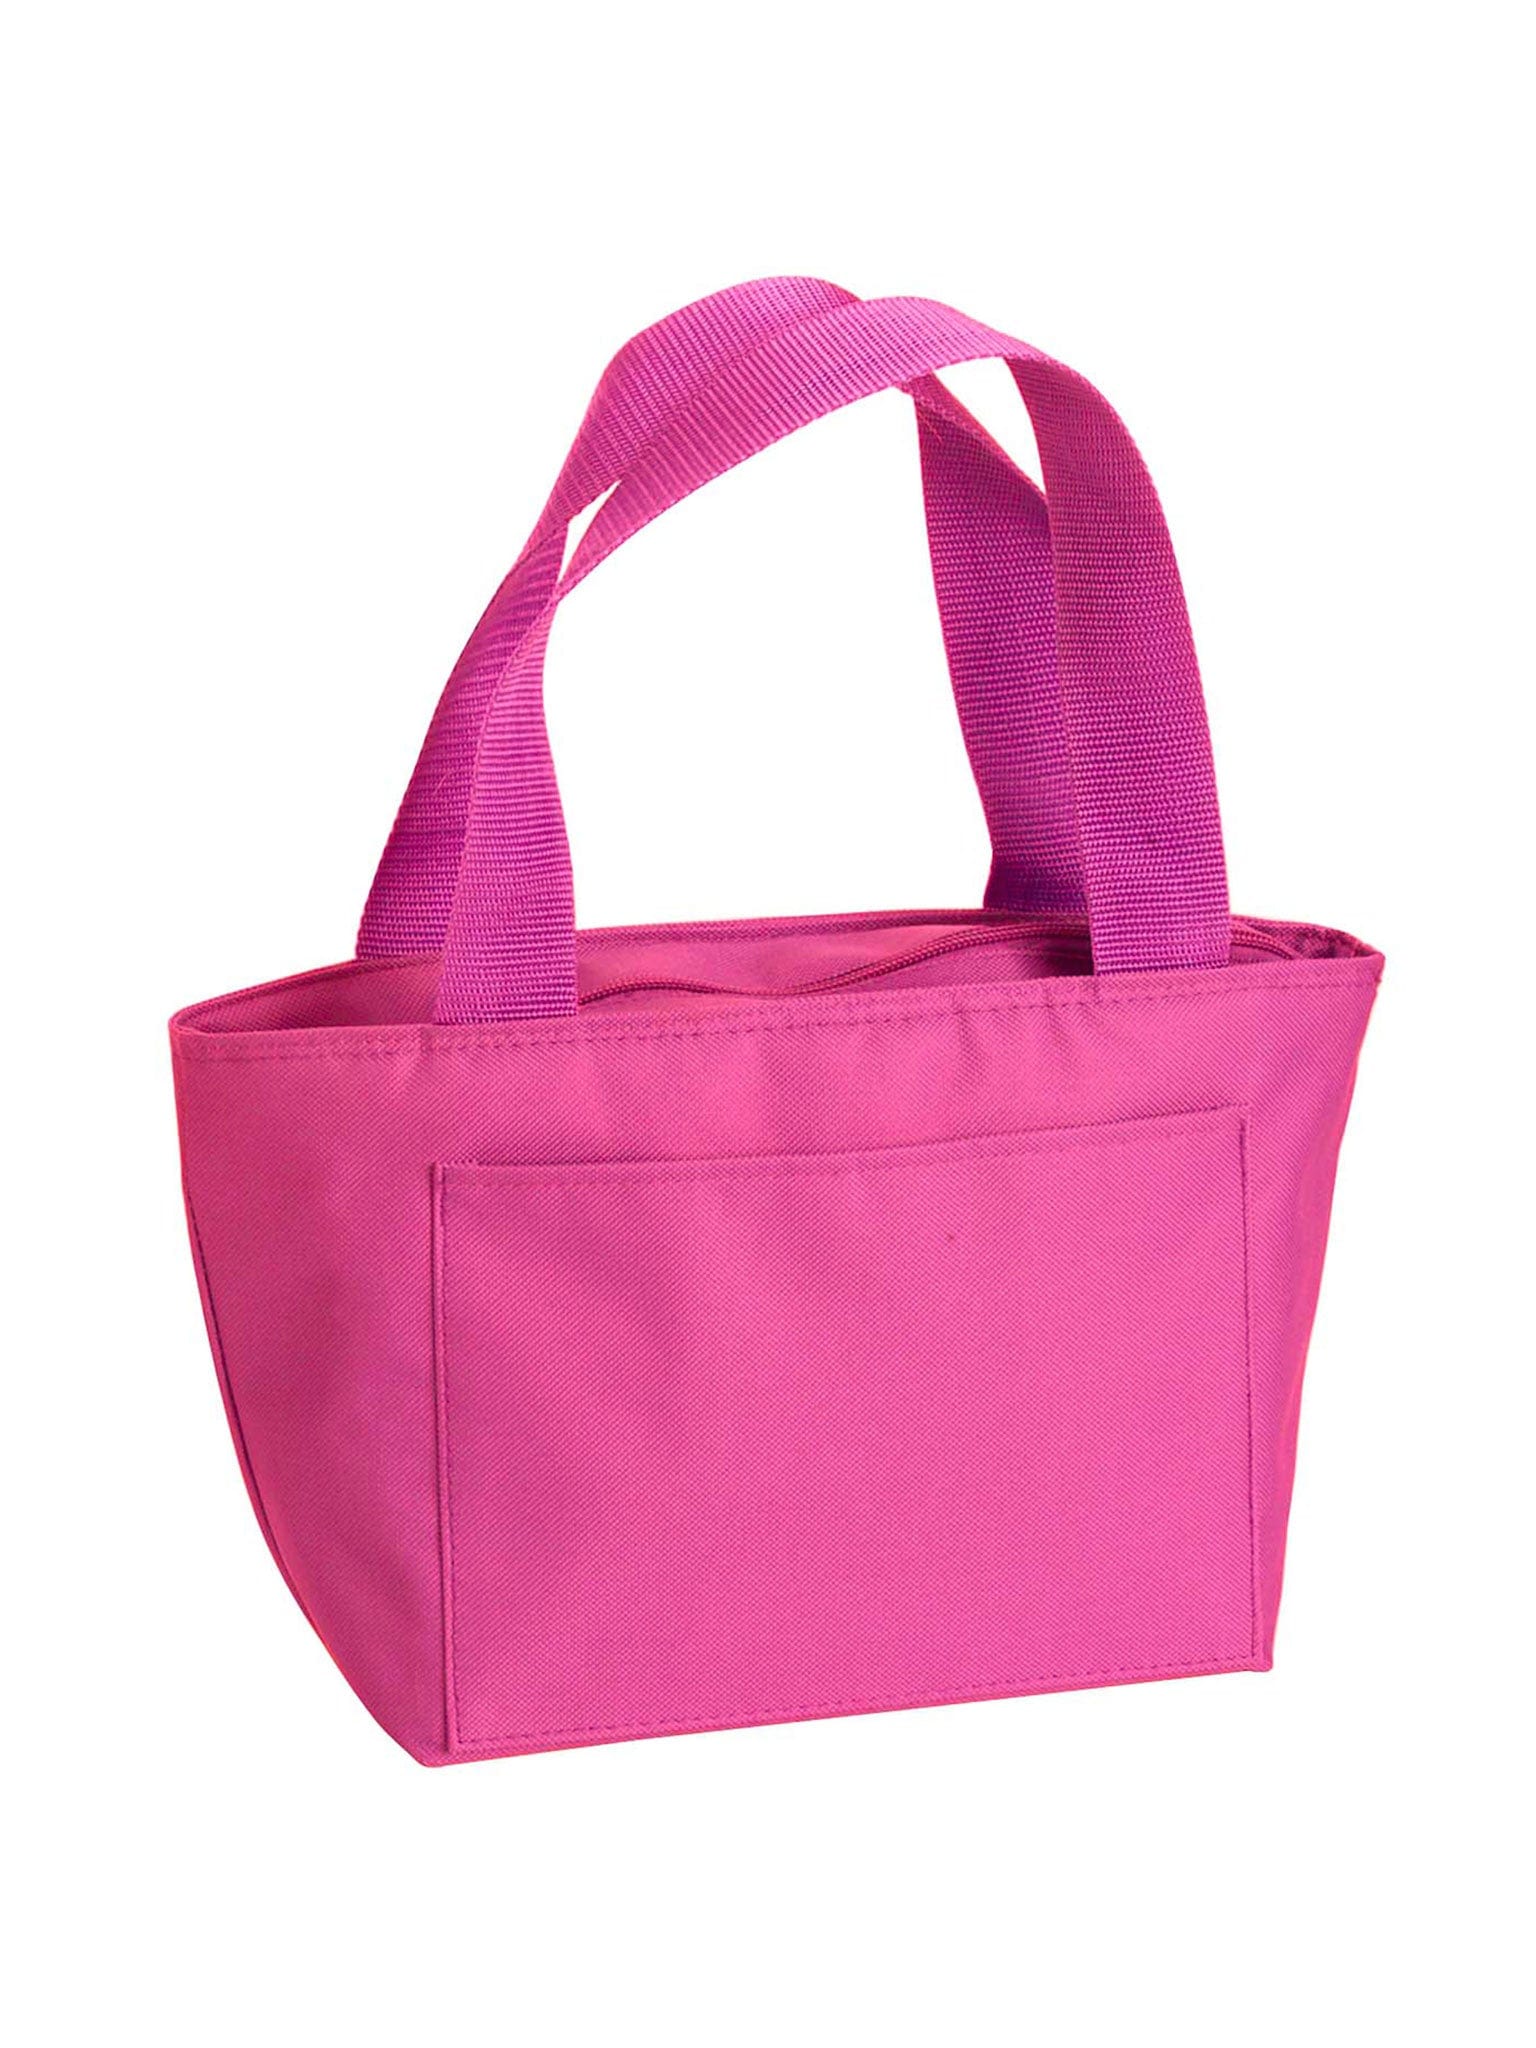 Re:Tote Recycled Tote Bag with Cooler